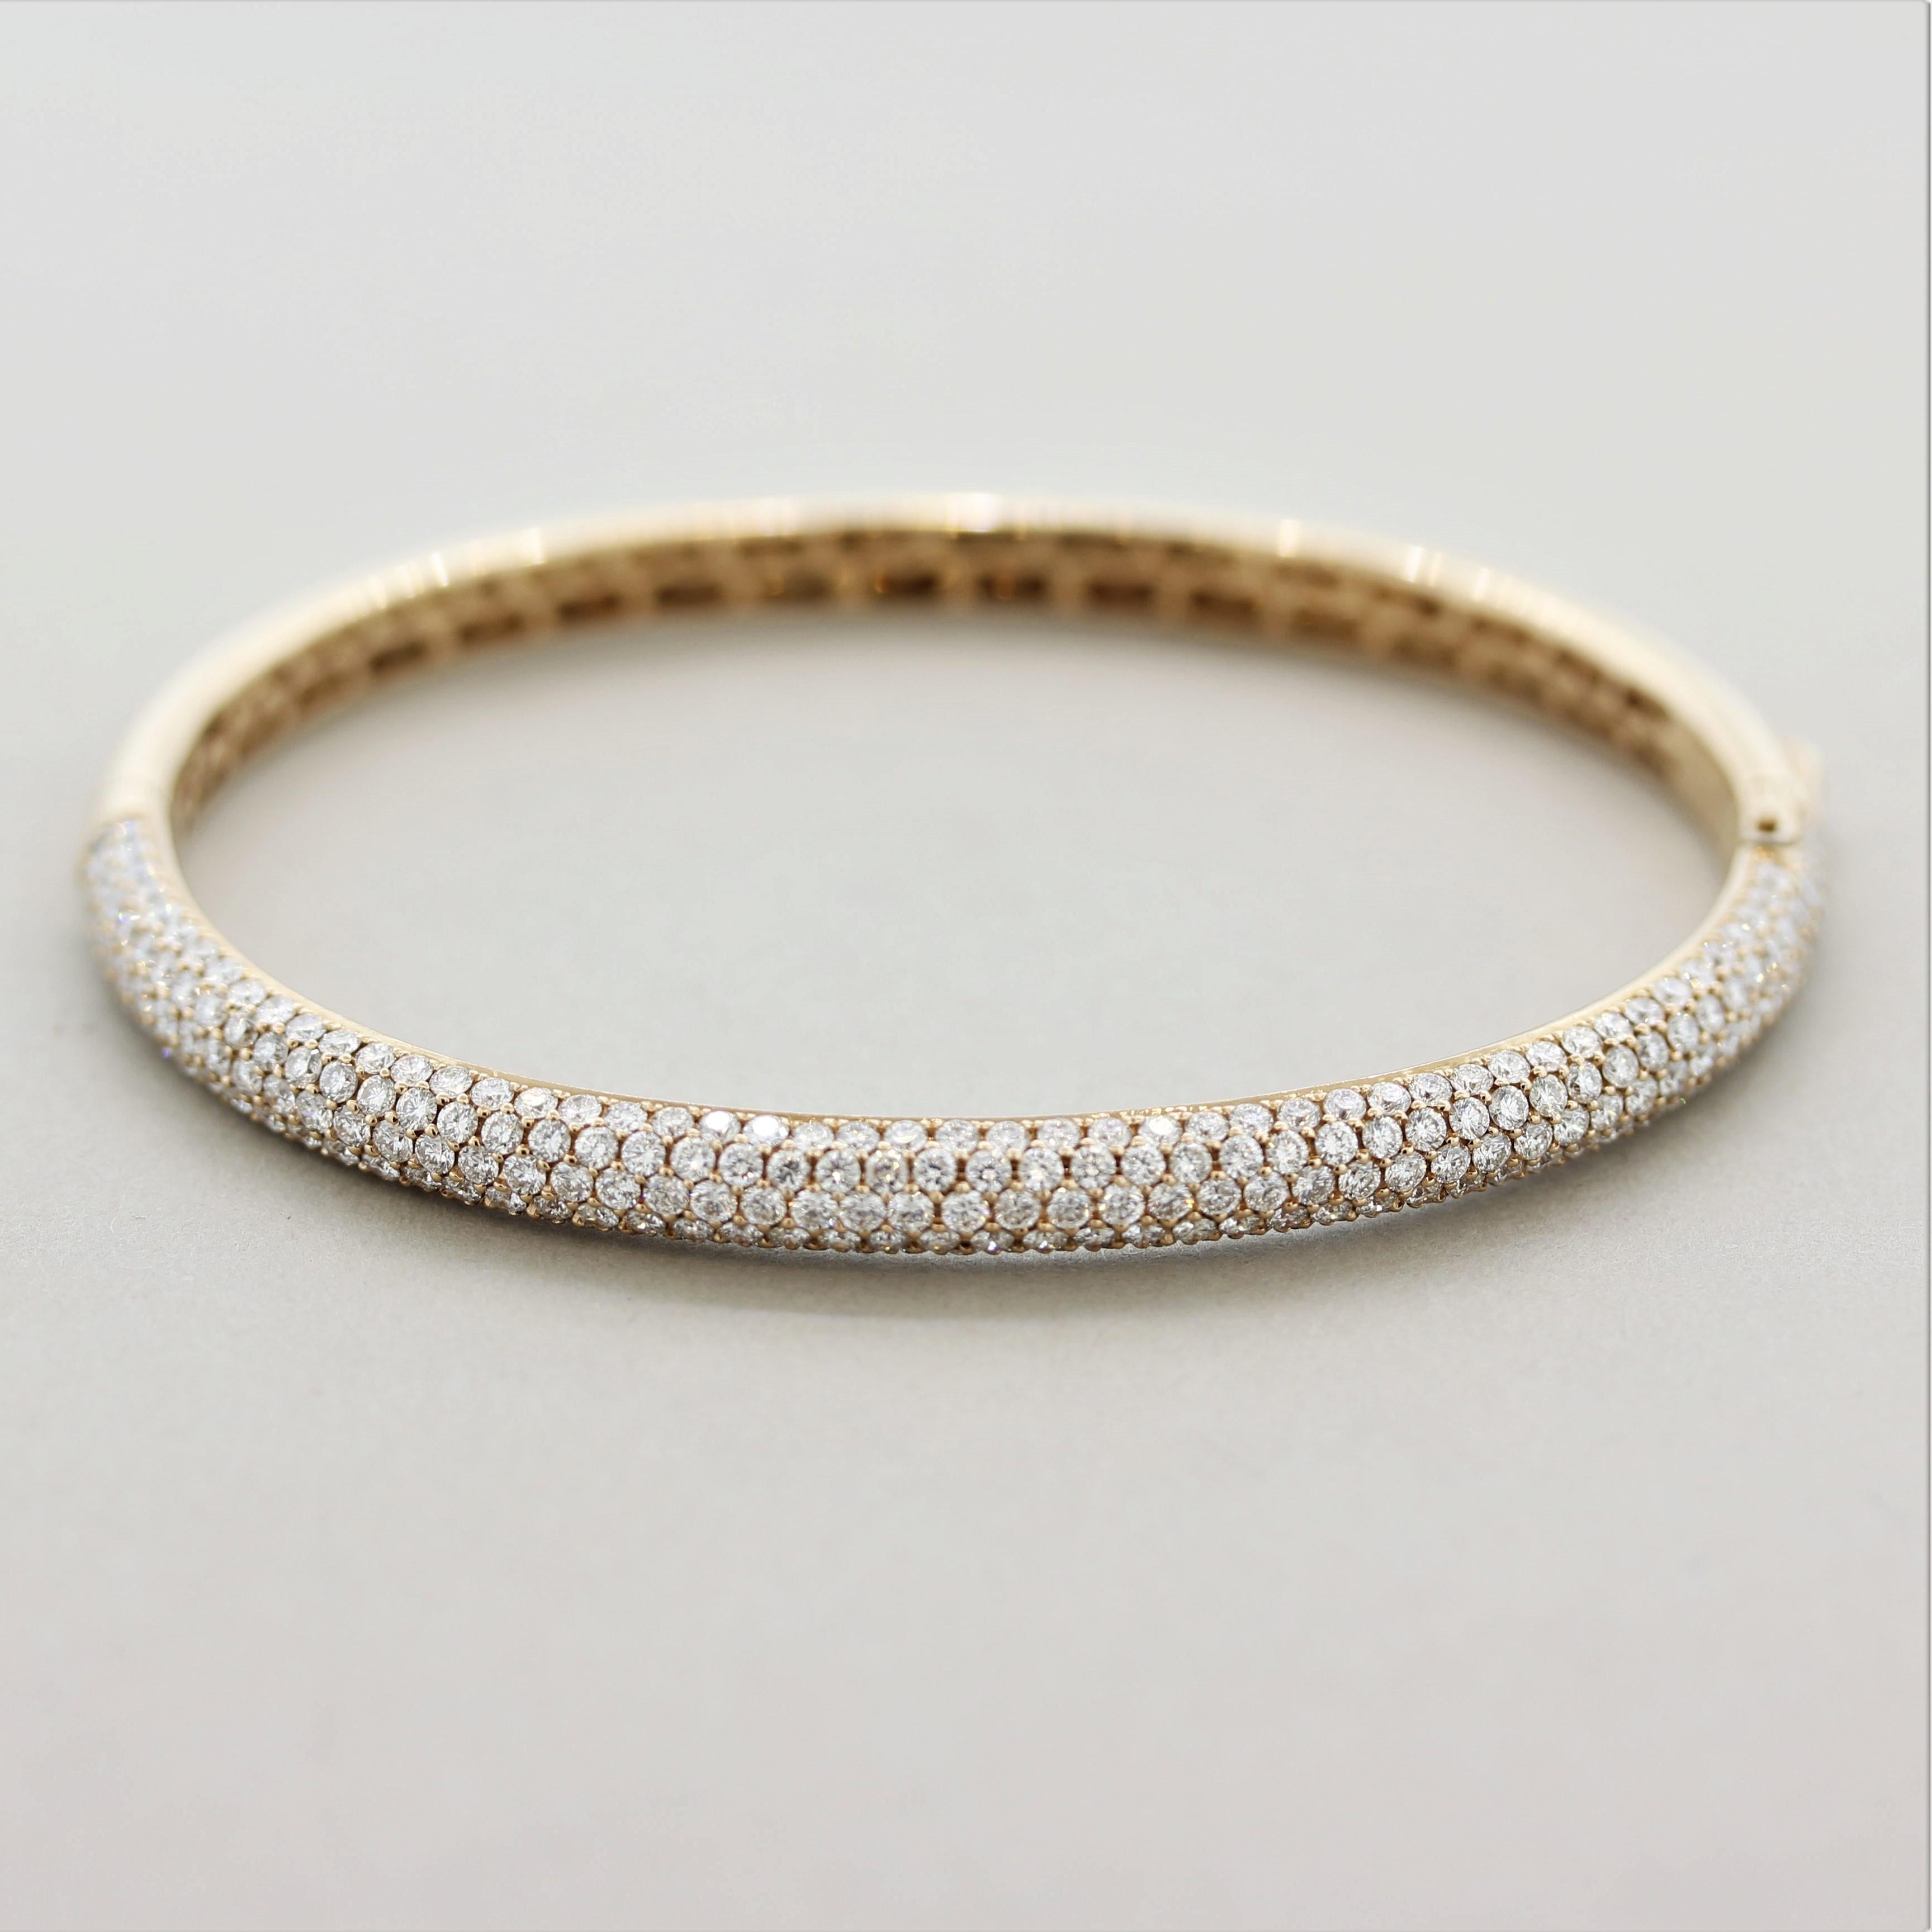 A stylish bangle bracelet featuring 4.43 carats of extra fine round brilliant-cut diamonds. Their quality can easily be noticed by the amount of brilliance and sparkle coming from them. They are pave-set in perfect spacing from each other blanketing